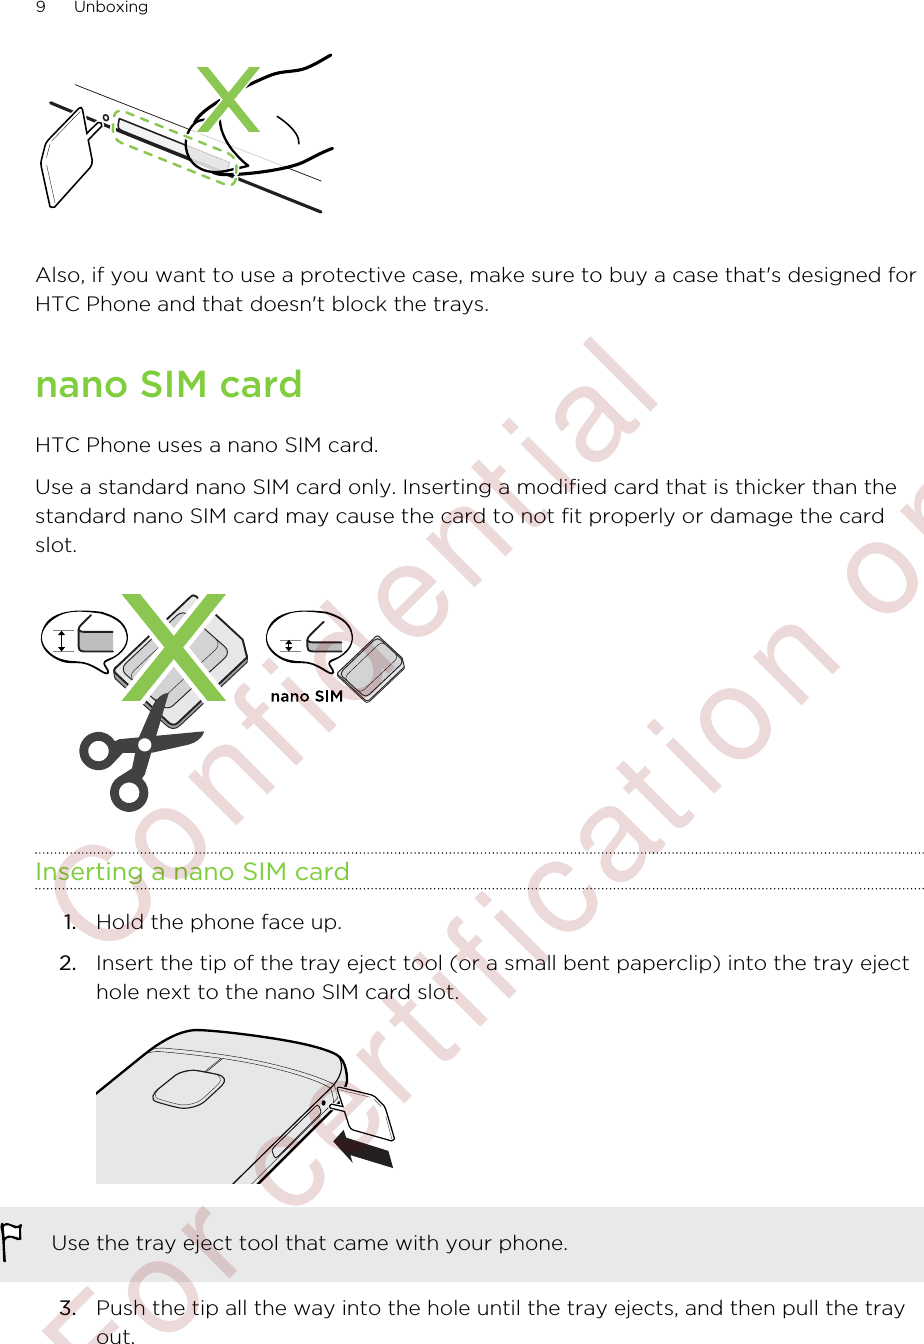 Also, if you want to use a protective case, make sure to buy a case that&apos;s designed forHTC Phone and that doesn&apos;t block the trays.nano SIM cardHTC Phone uses a nano SIM card.Use a standard nano SIM card only. Inserting a modified card that is thicker than thestandard nano SIM card may cause the card to not fit properly or damage the cardslot.Inserting a nano SIM card1. Hold the phone face up.2. Insert the tip of the tray eject tool (or a small bent paperclip) into the tray ejecthole next to the nano SIM card slot. Use the tray eject tool that came with your phone.3. Push the tip all the way into the hole until the tray ejects, and then pull the trayout.9 Unboxing        Confident ial  For cert ificat ion only